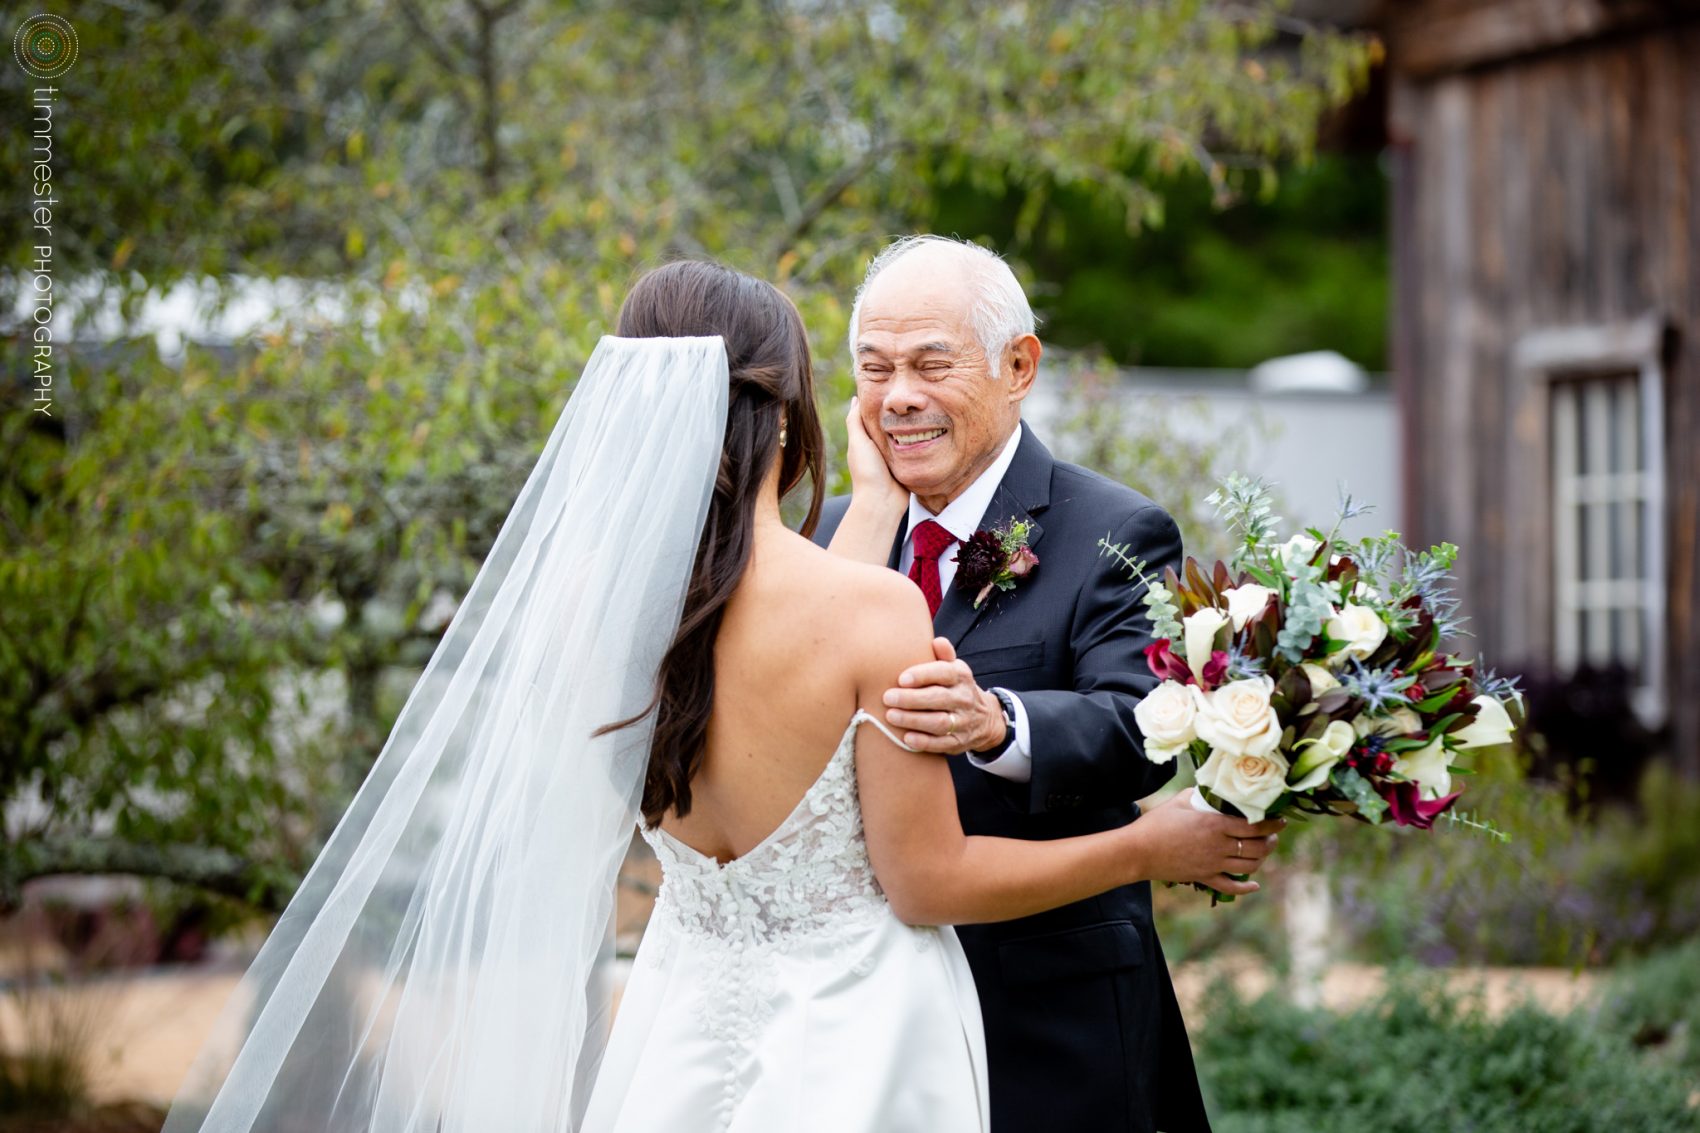 The bride and her grandfather at Sassafras Fork Farm in NC.